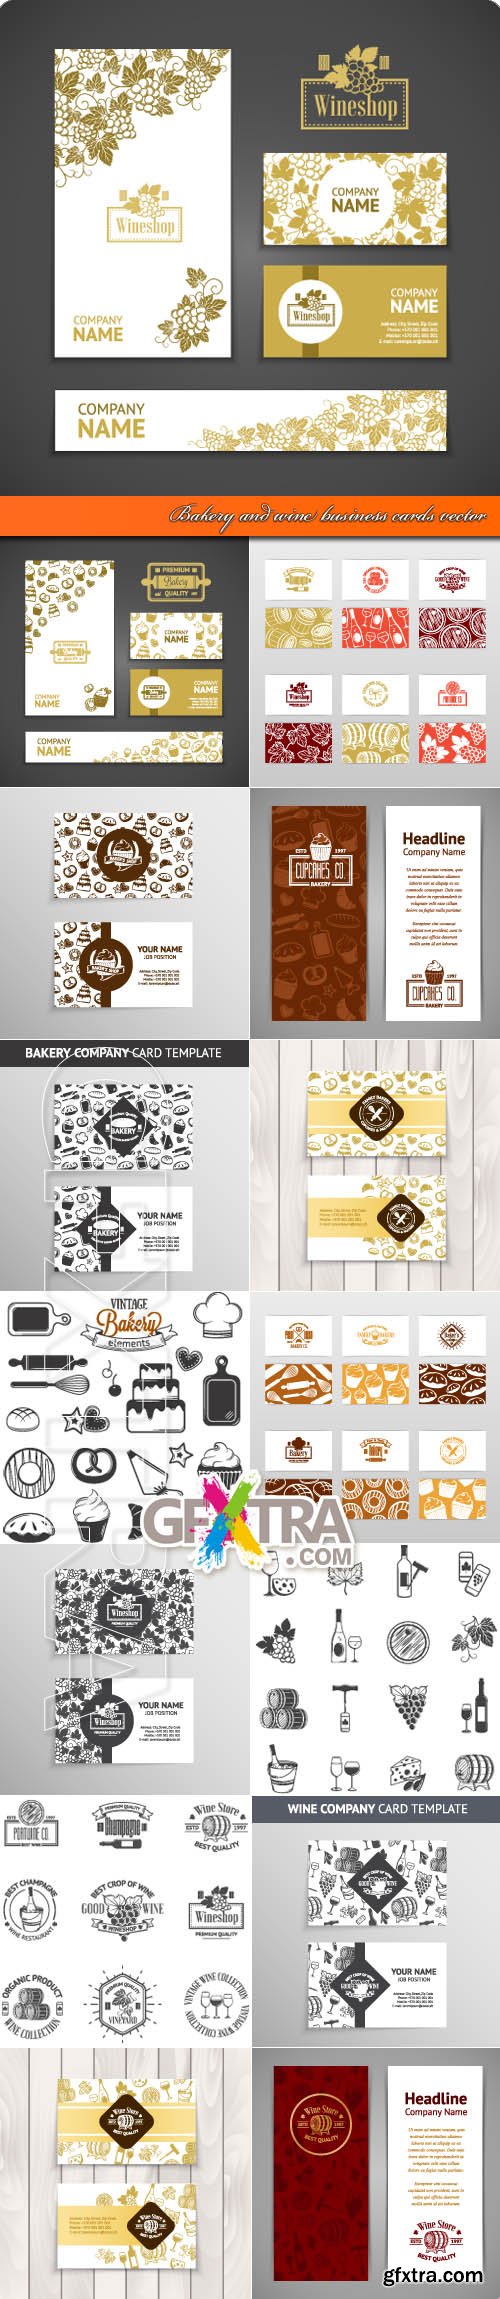 Bakery and wine business cards vector